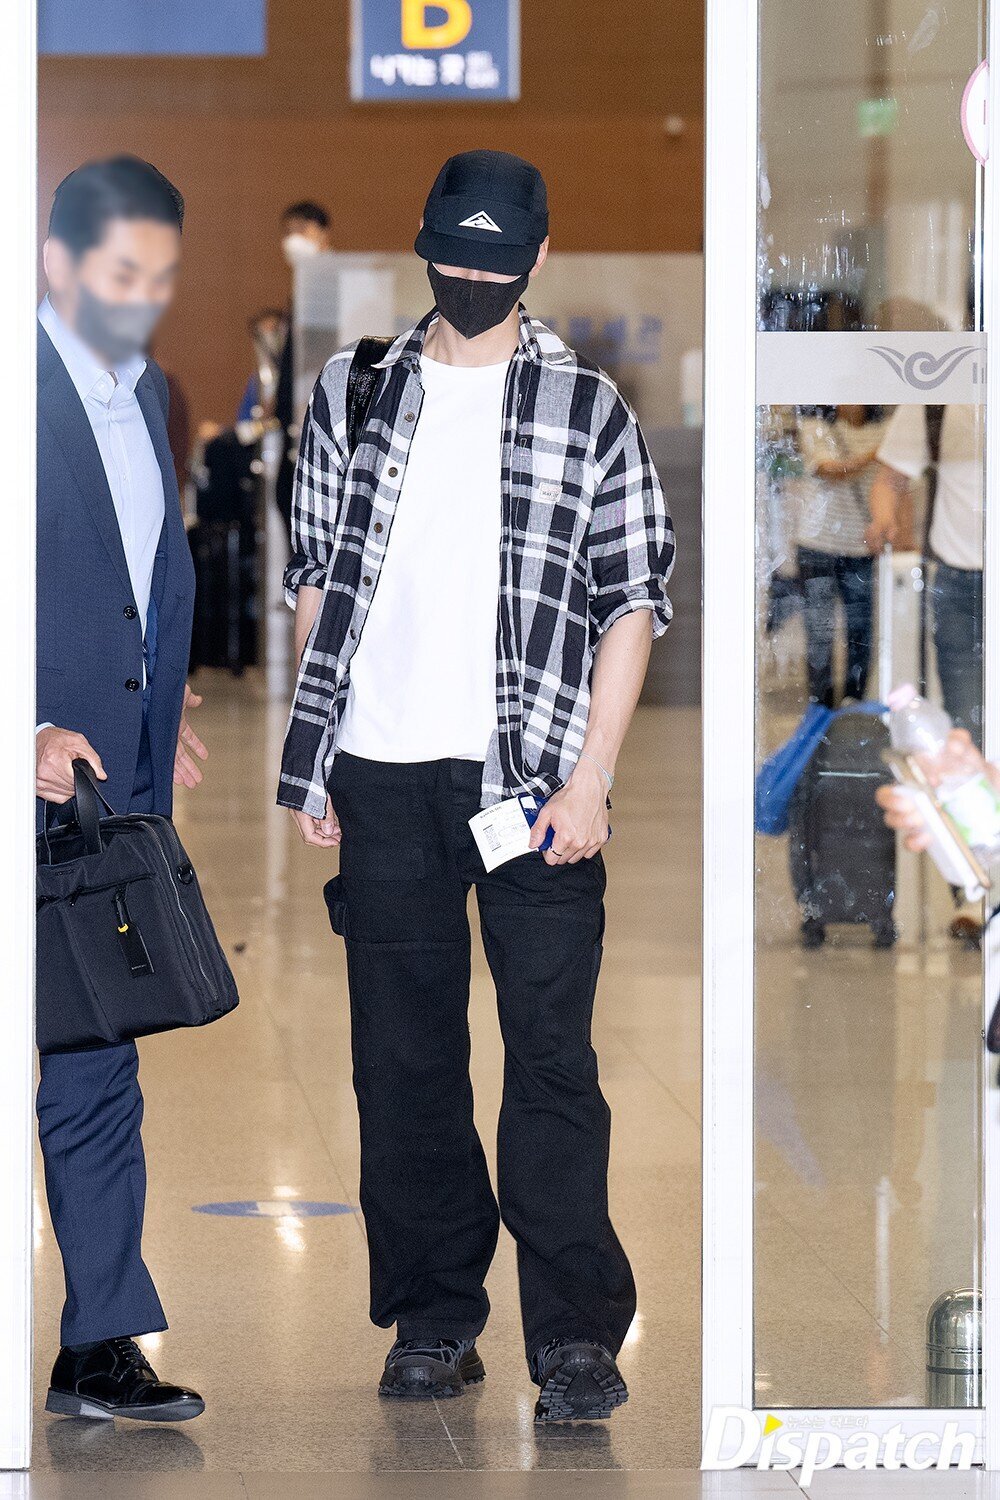 230606 Cha Eunwoo at Incheon International Airport Departure to Paris,  France for Chaumet Event